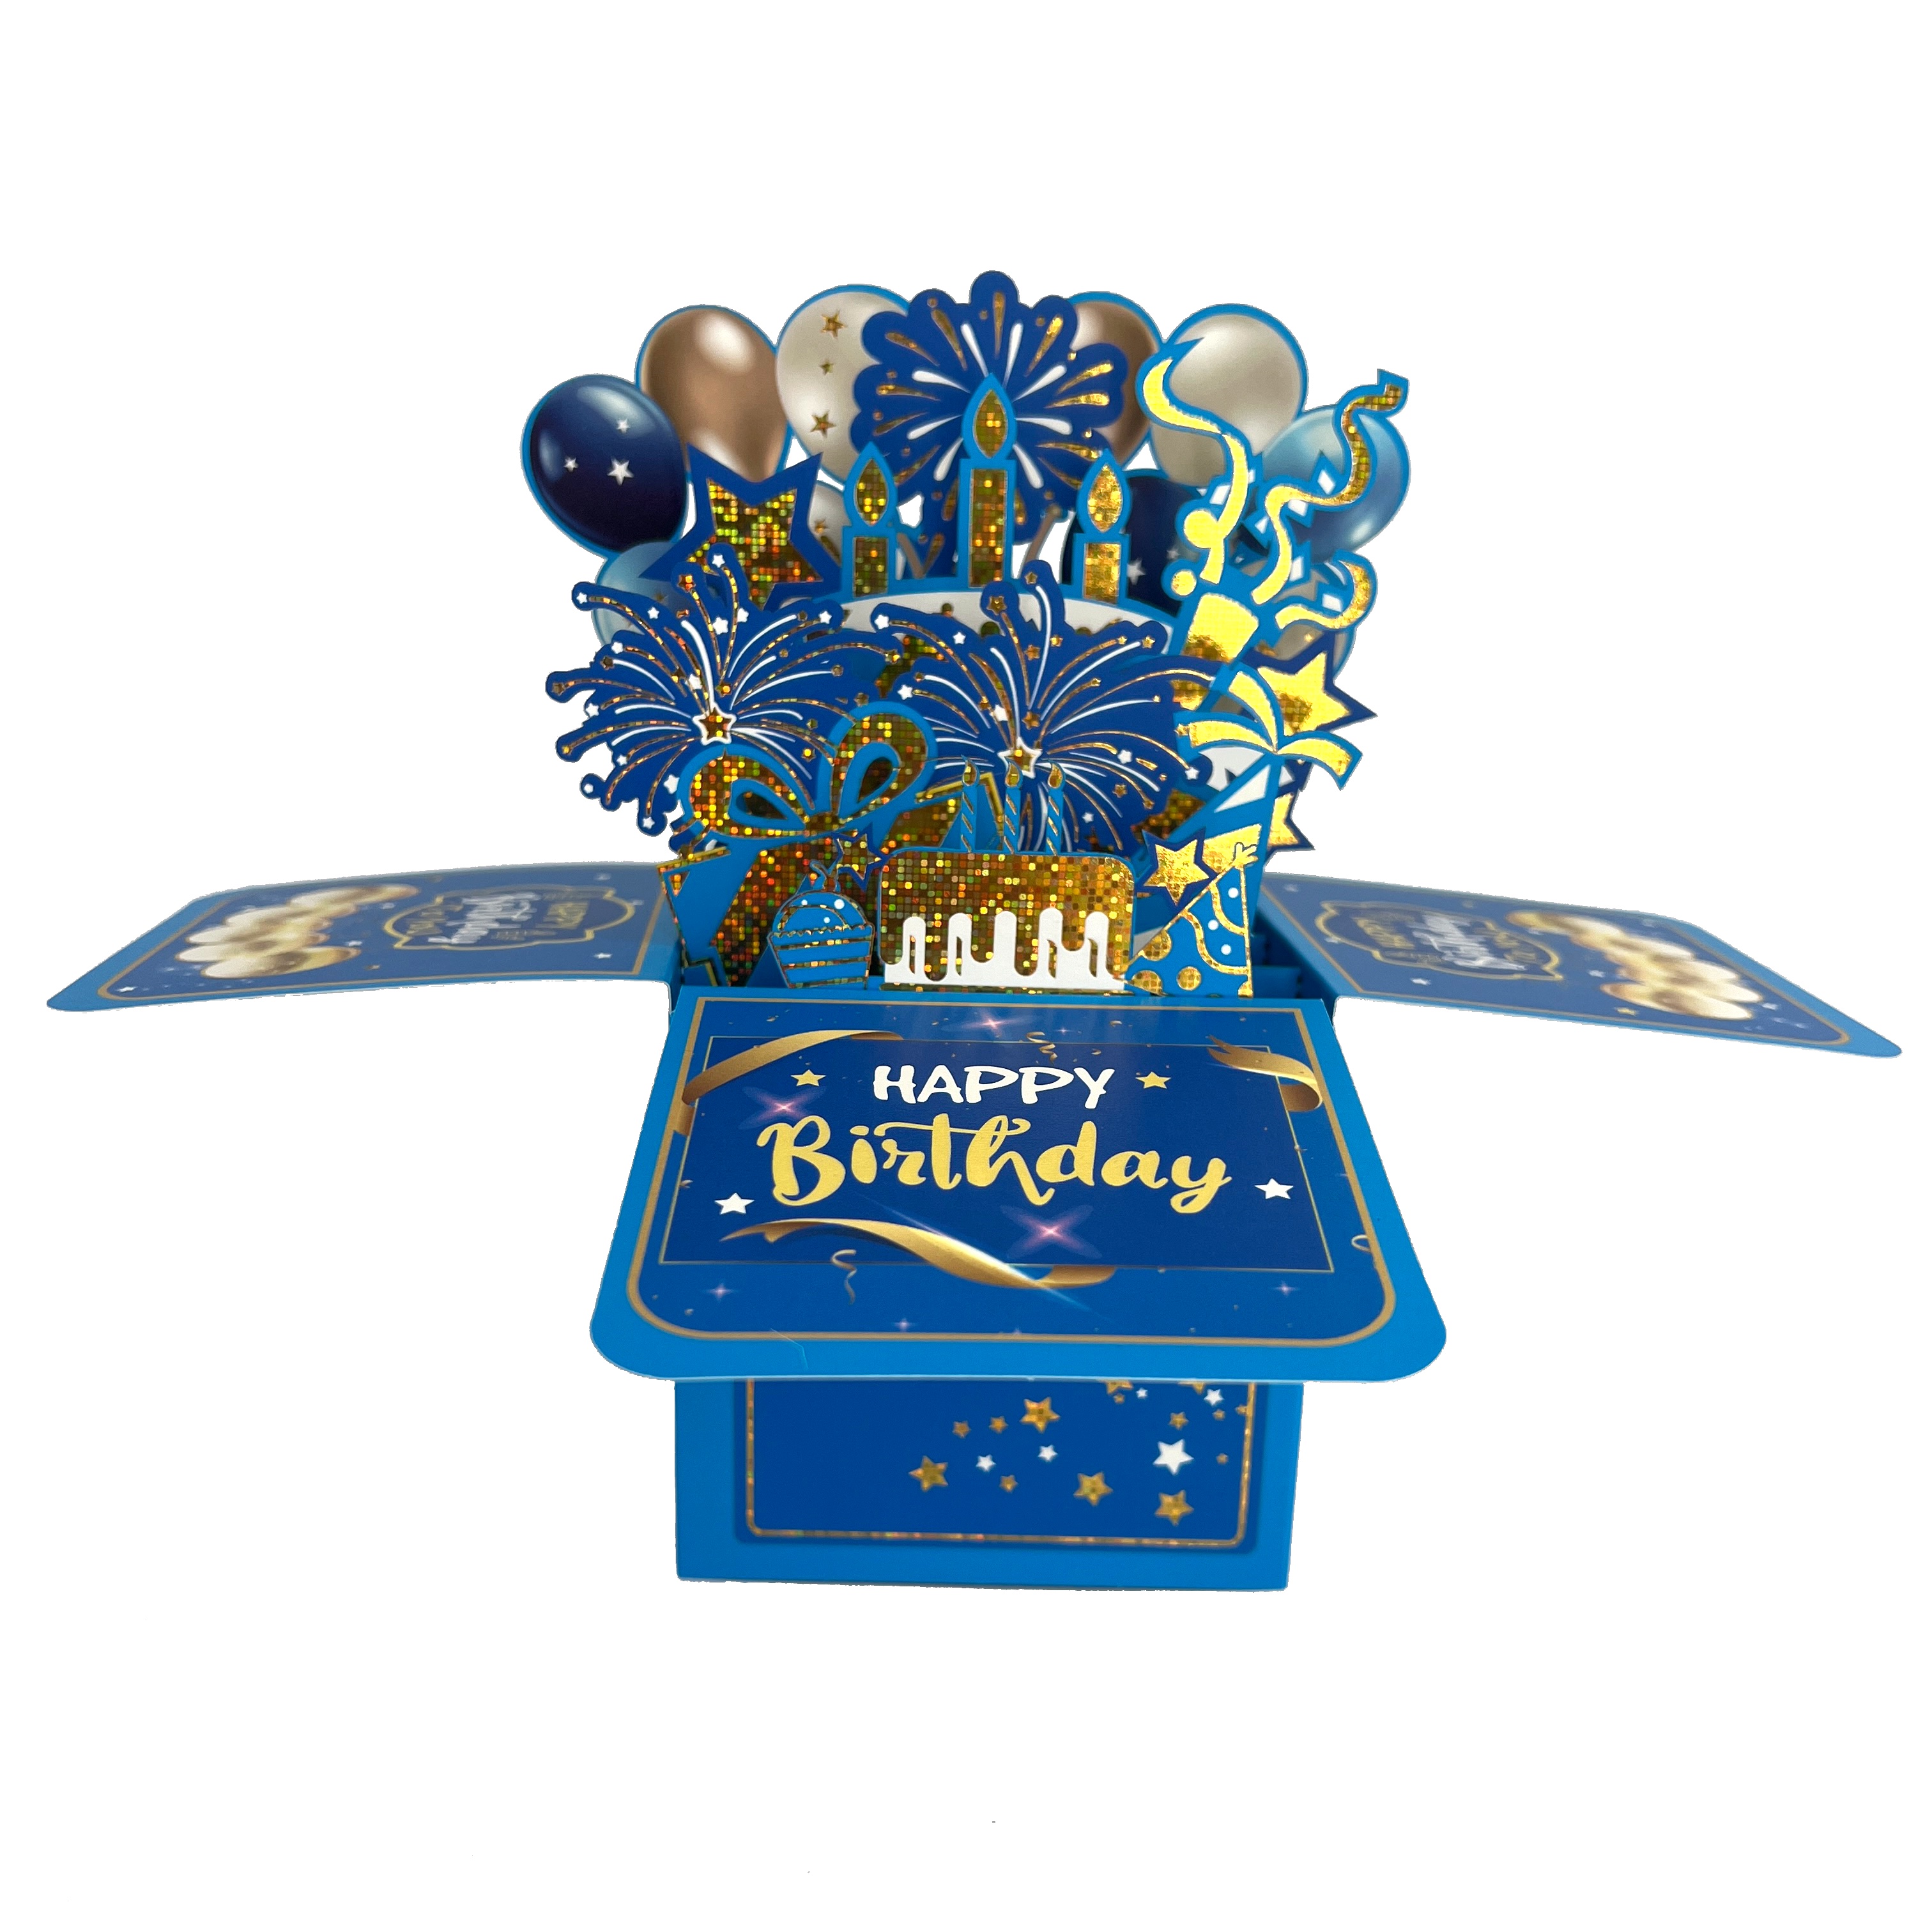 

Happy Birthday Pop-up Greeting Card With Cake, Candles, Gifts, And Balloons - 3d Patterned Cartoon Design, Perfect For Anyone's Birthday Celebration, Includes Envelope And Message Card